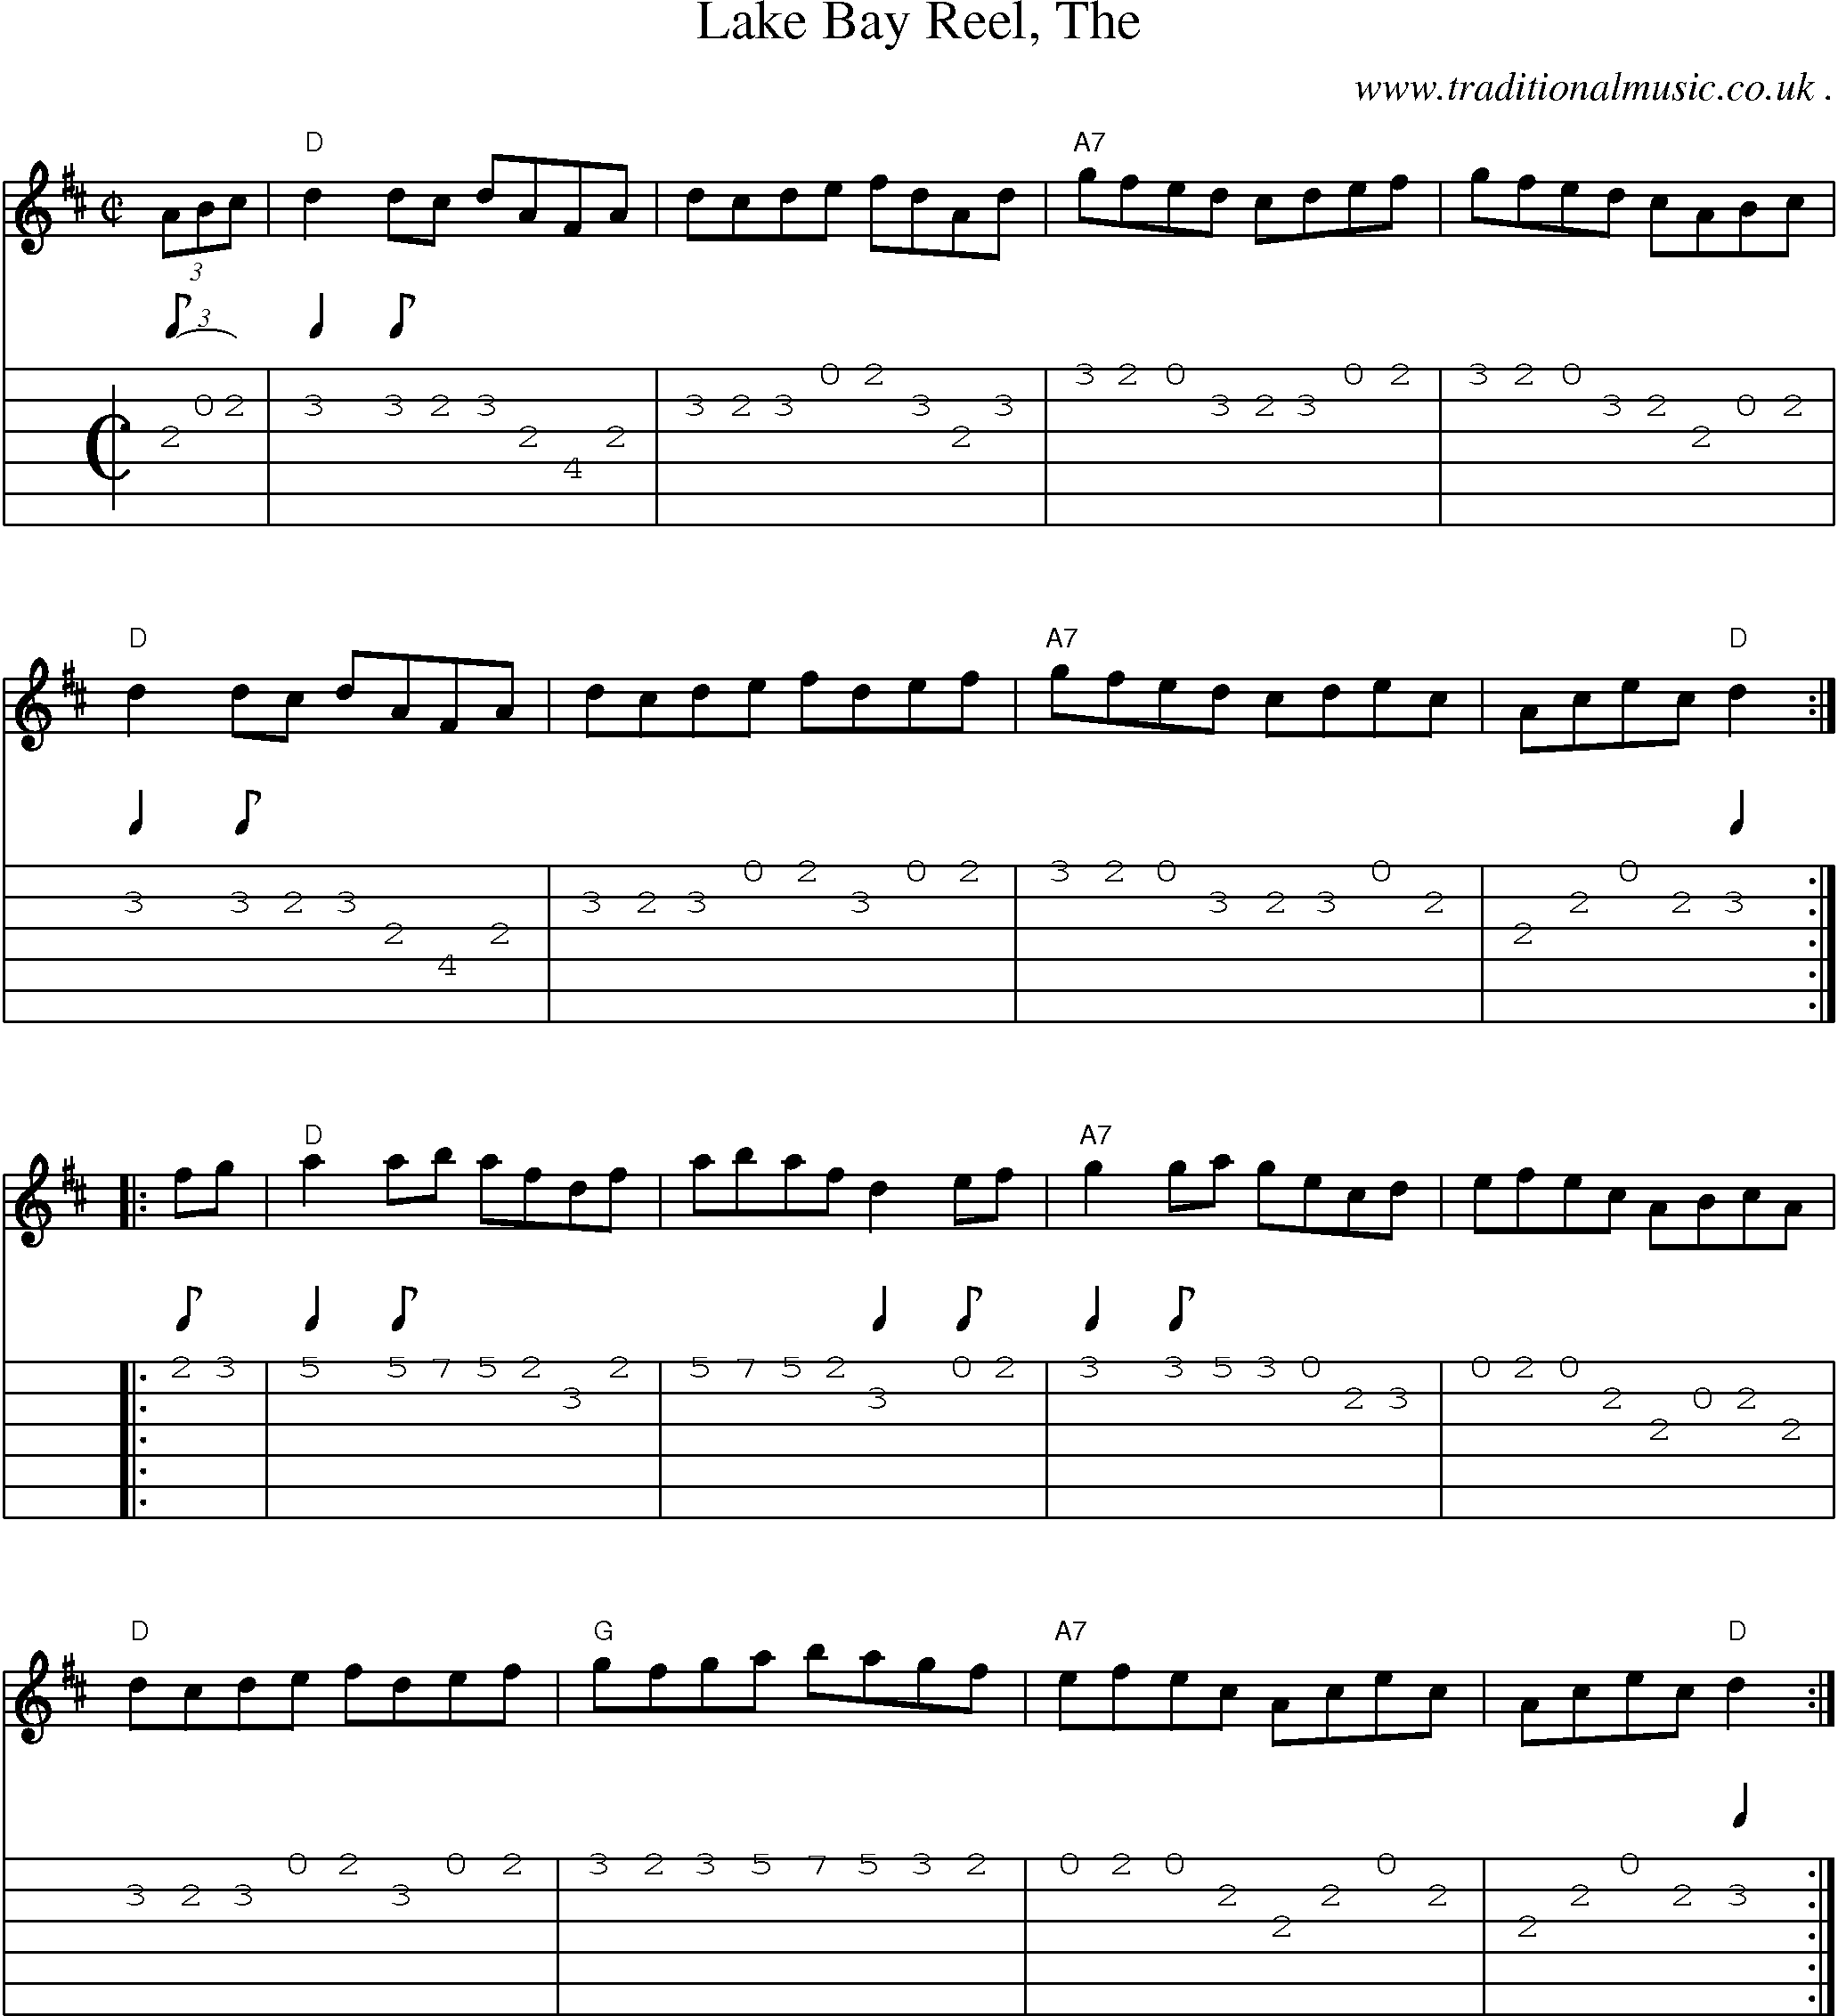 Music Score and Guitar Tabs for Lake Bay Reel The